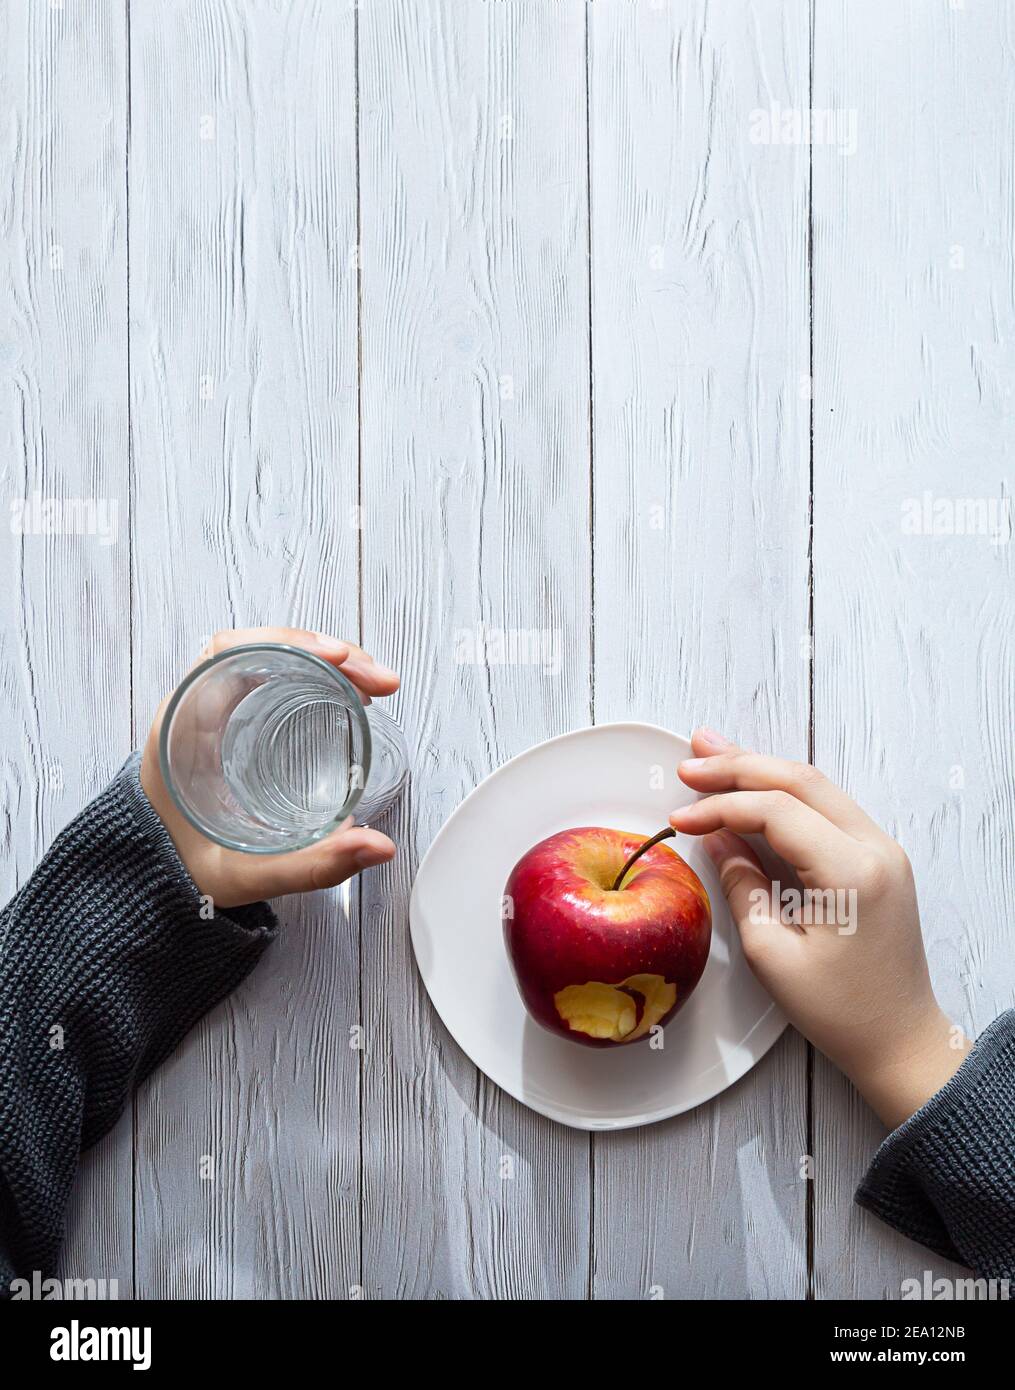 Minimal healthy snack concept. The child's hands are holding an apple and a glass of water. Still life on a light wooden table with shadows and highli Stock Photo